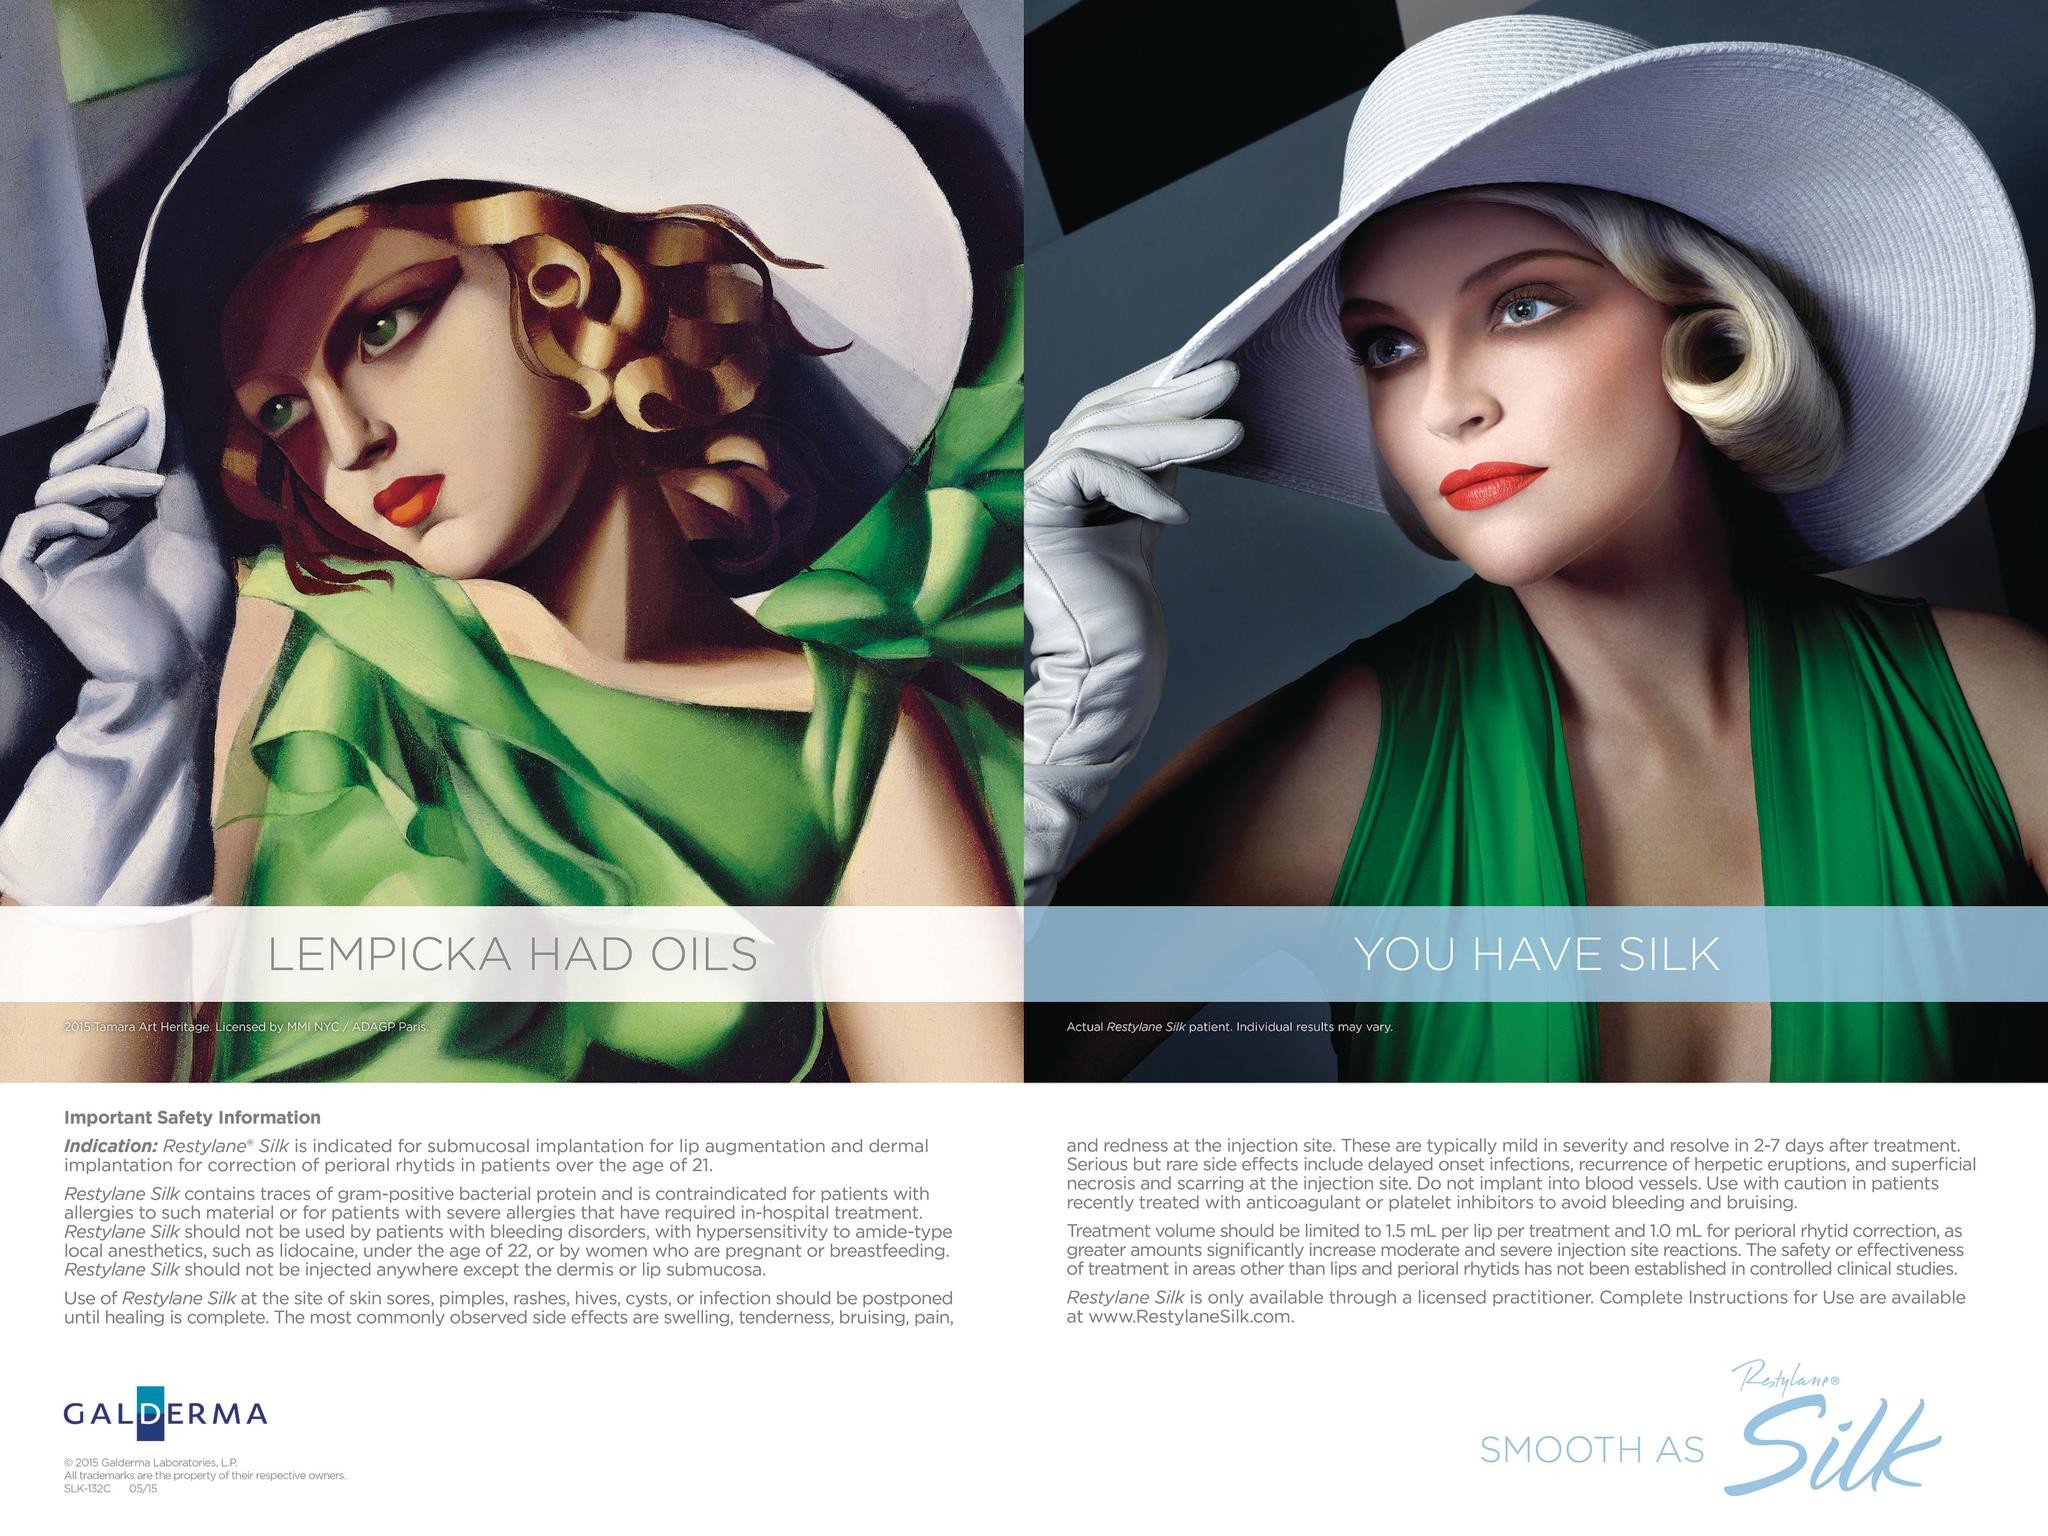 The “Artistry” Campaign for Galderma, Restylane SILK